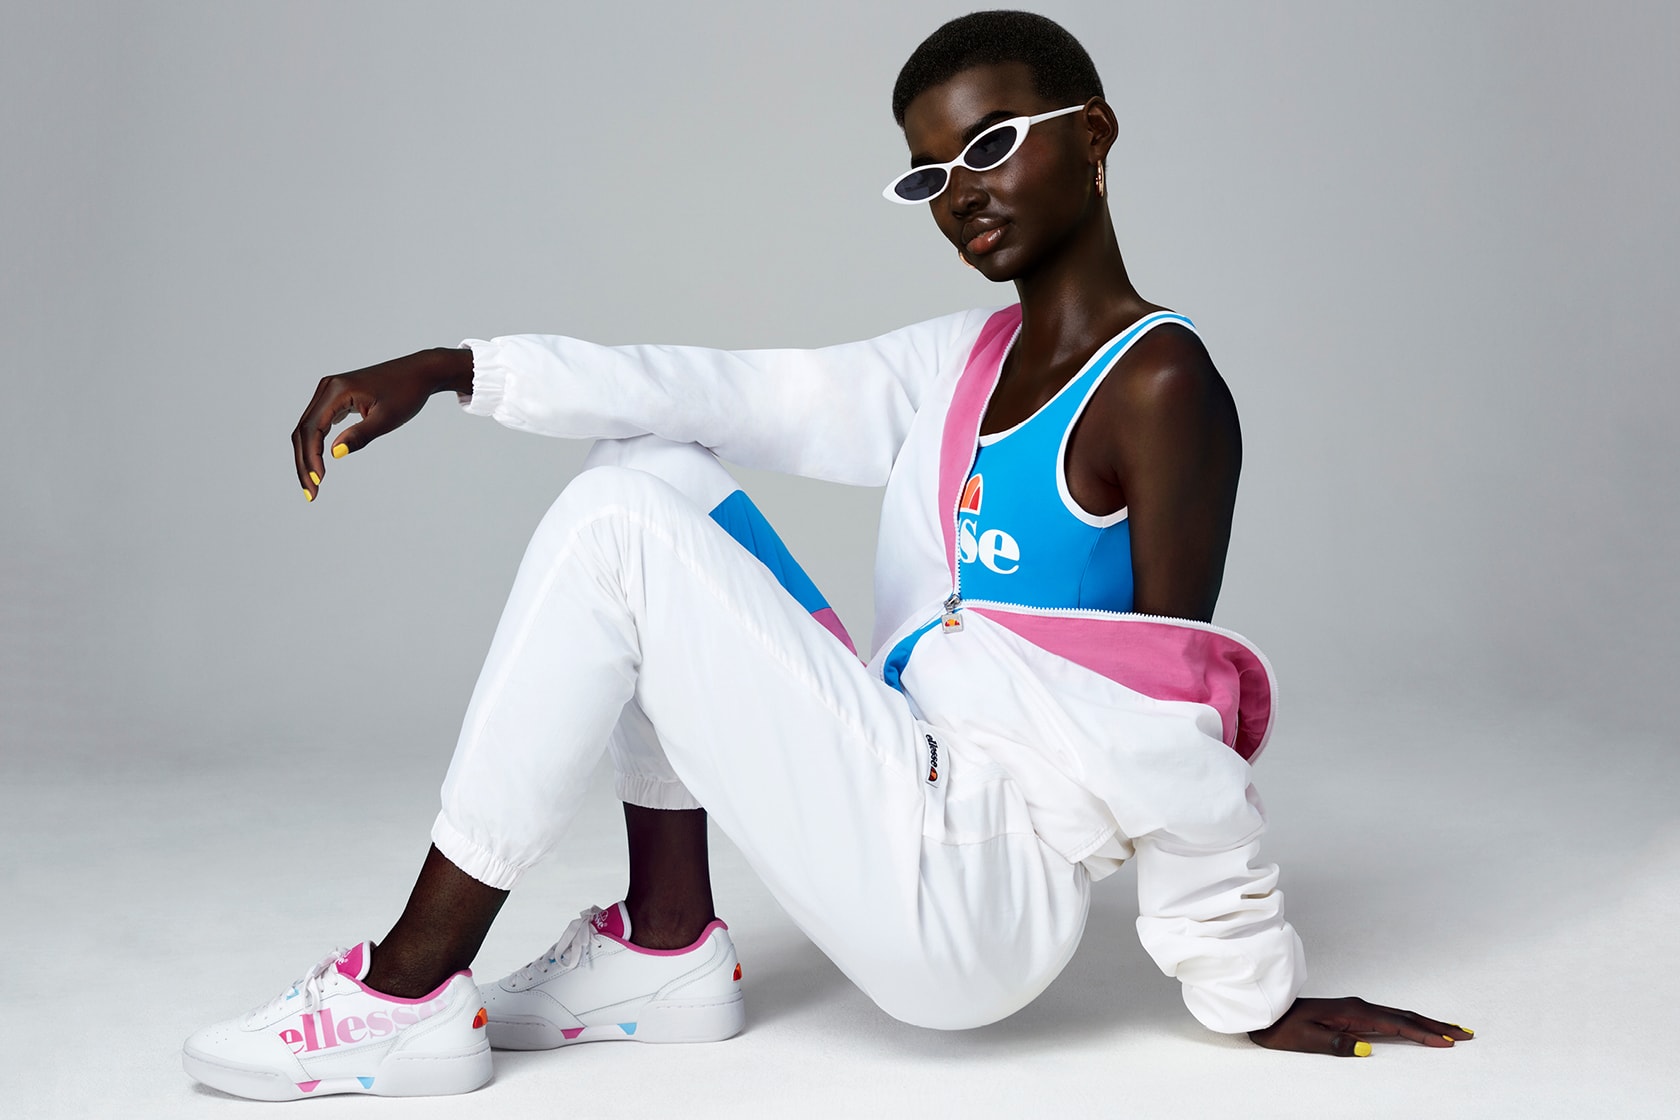 Ellesse to welcome new brand director